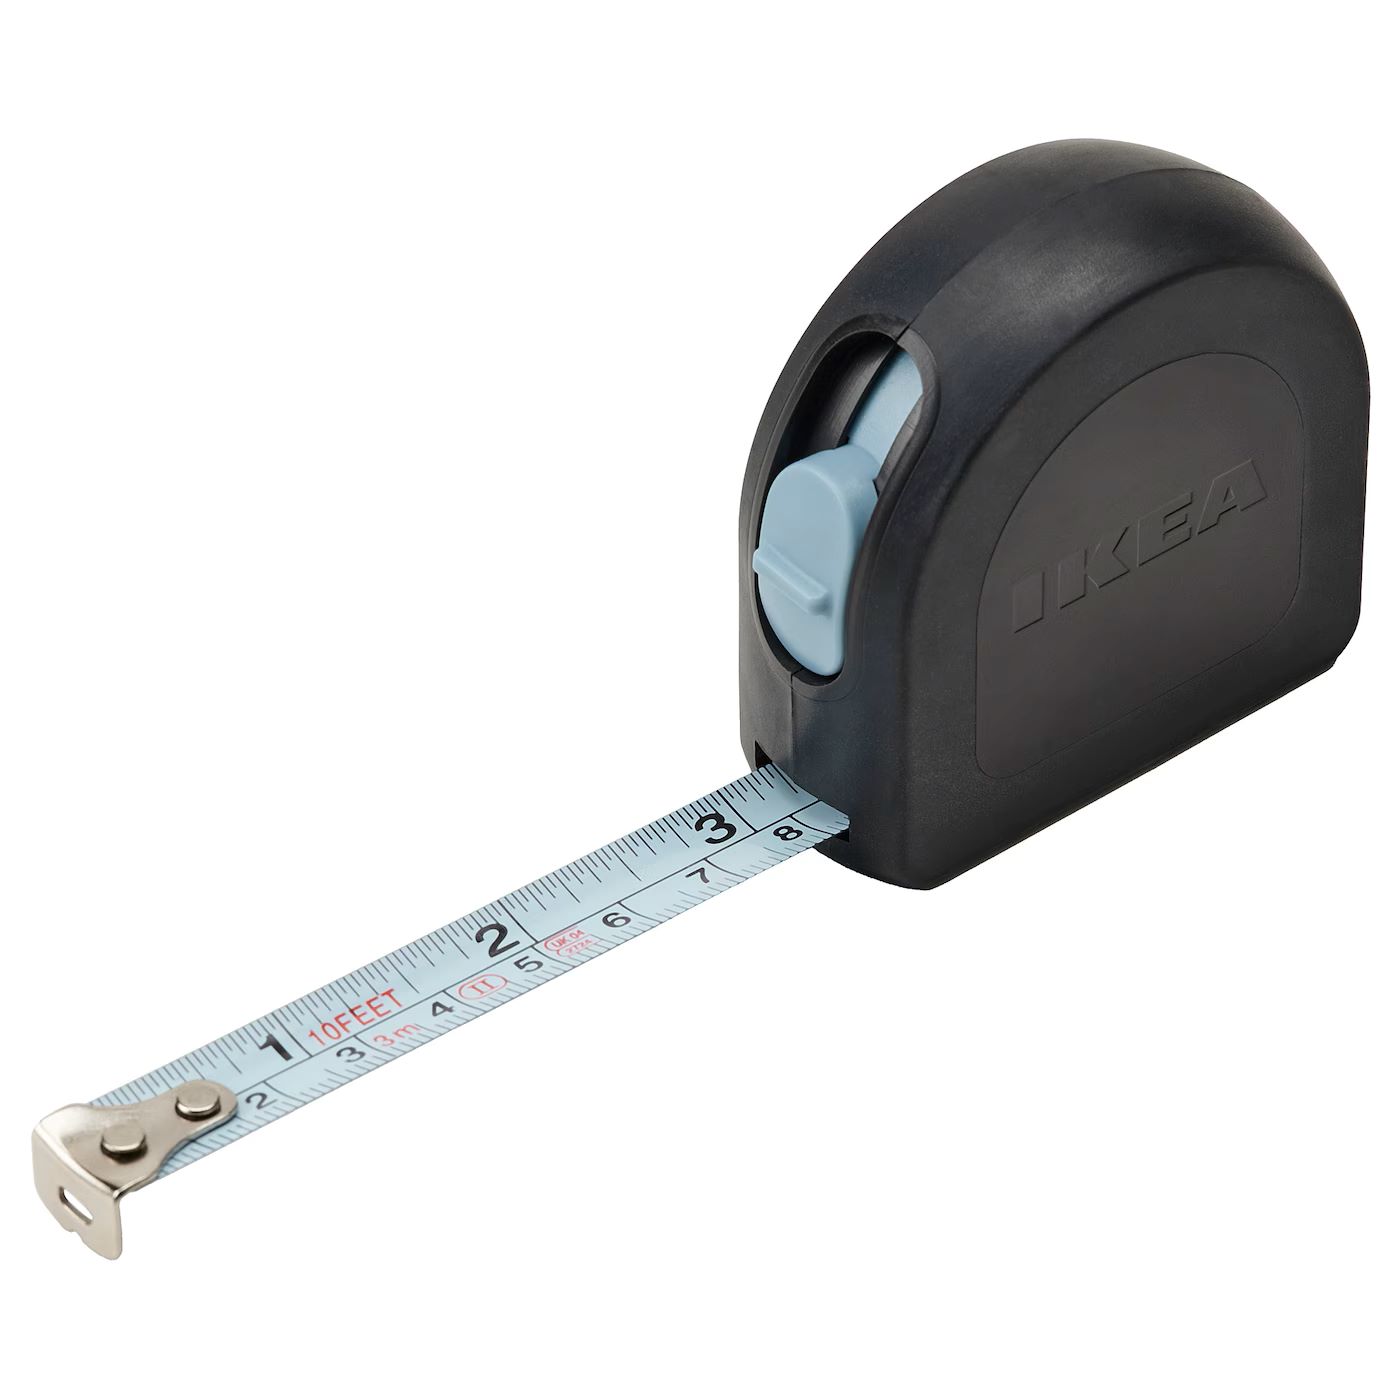 What Is 3/8 On A Measuring Tape